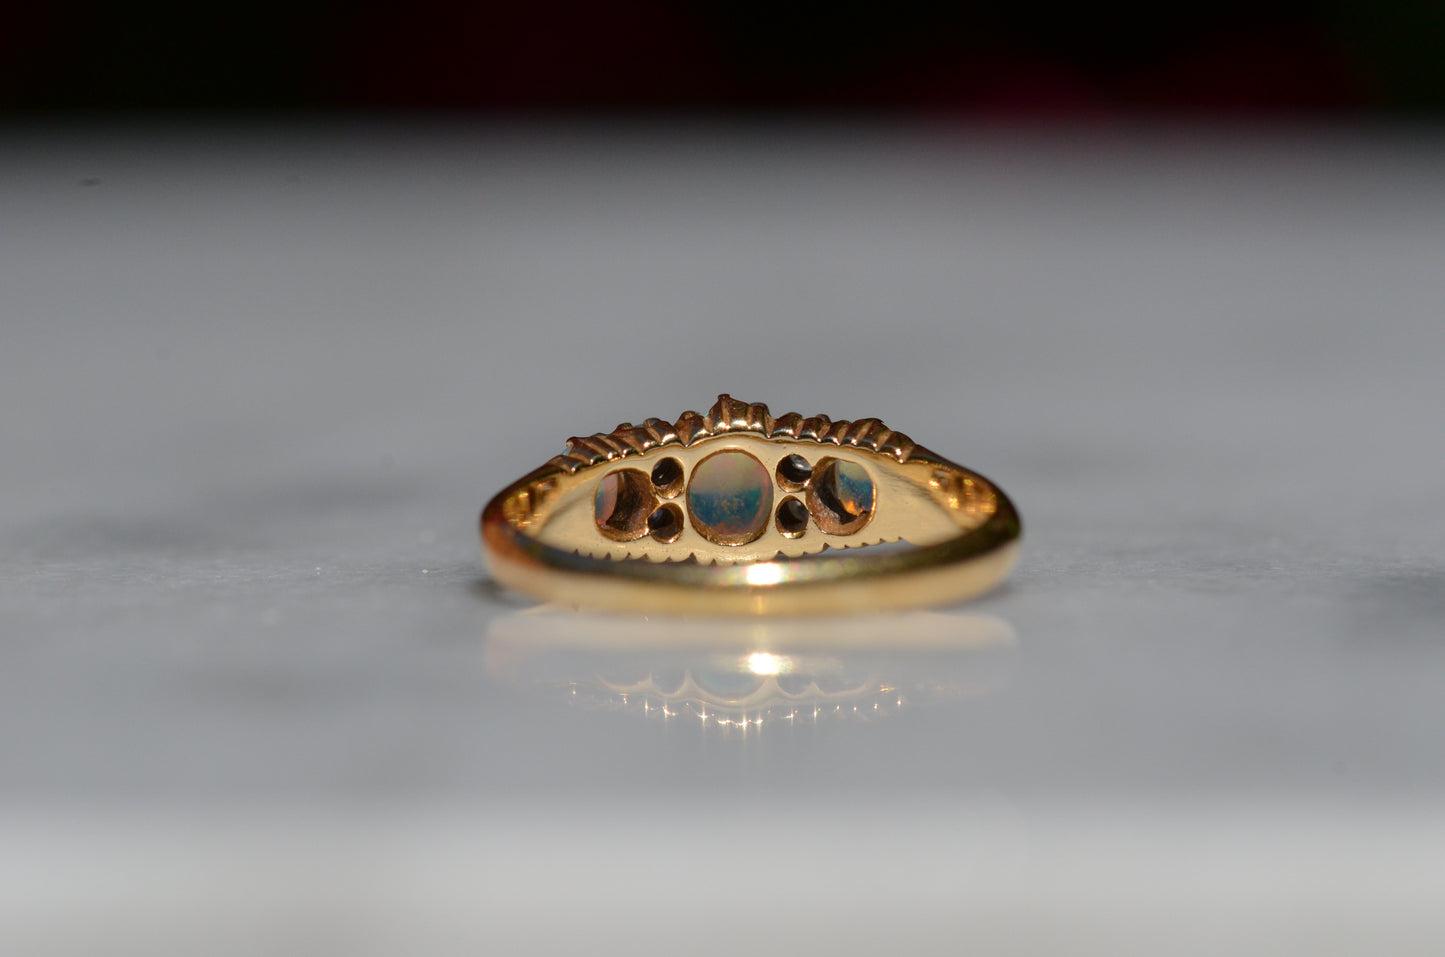 A closely-cropped macro of the Victorian ring, showcasing the strong green and blue play of color in the opals with a hint of violet and orange. The ring is photographed from behind, focused on the back of the setting and underside of the stones.